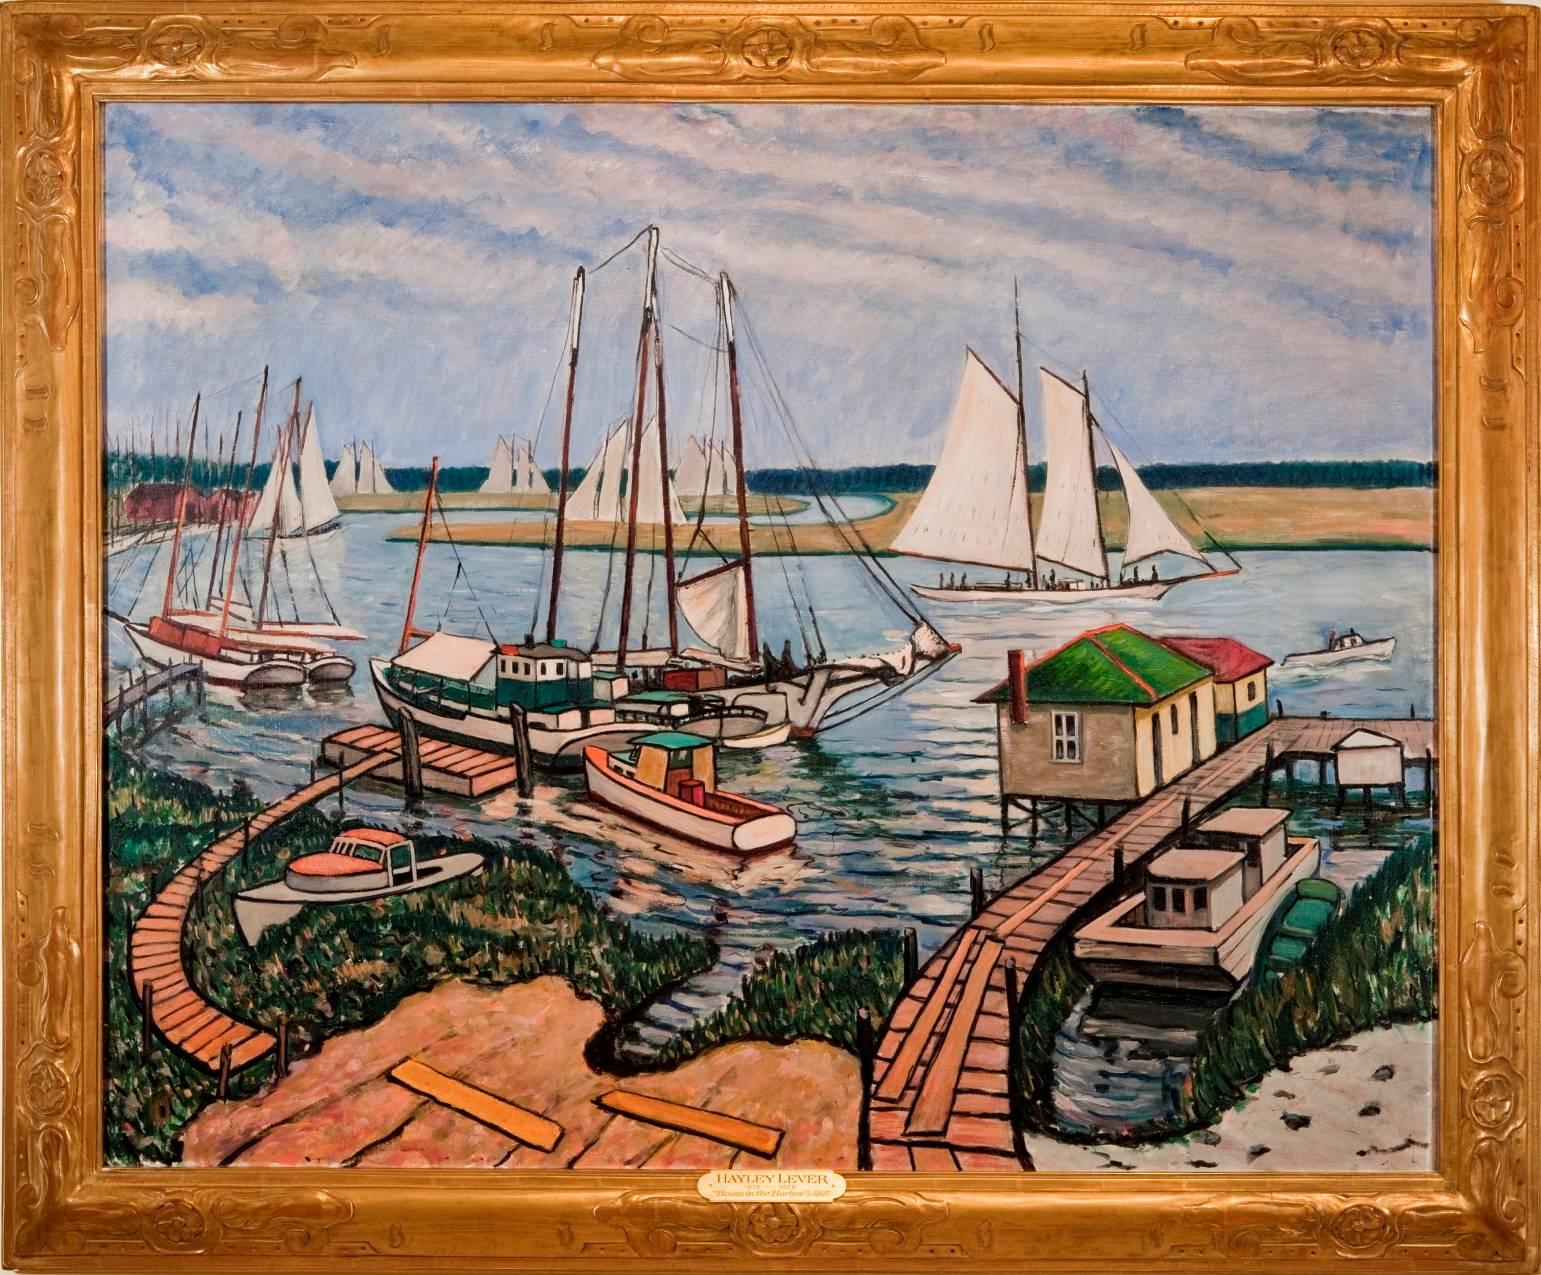 Hayley Lever Landscape Painting - "Boats in the Harbor"